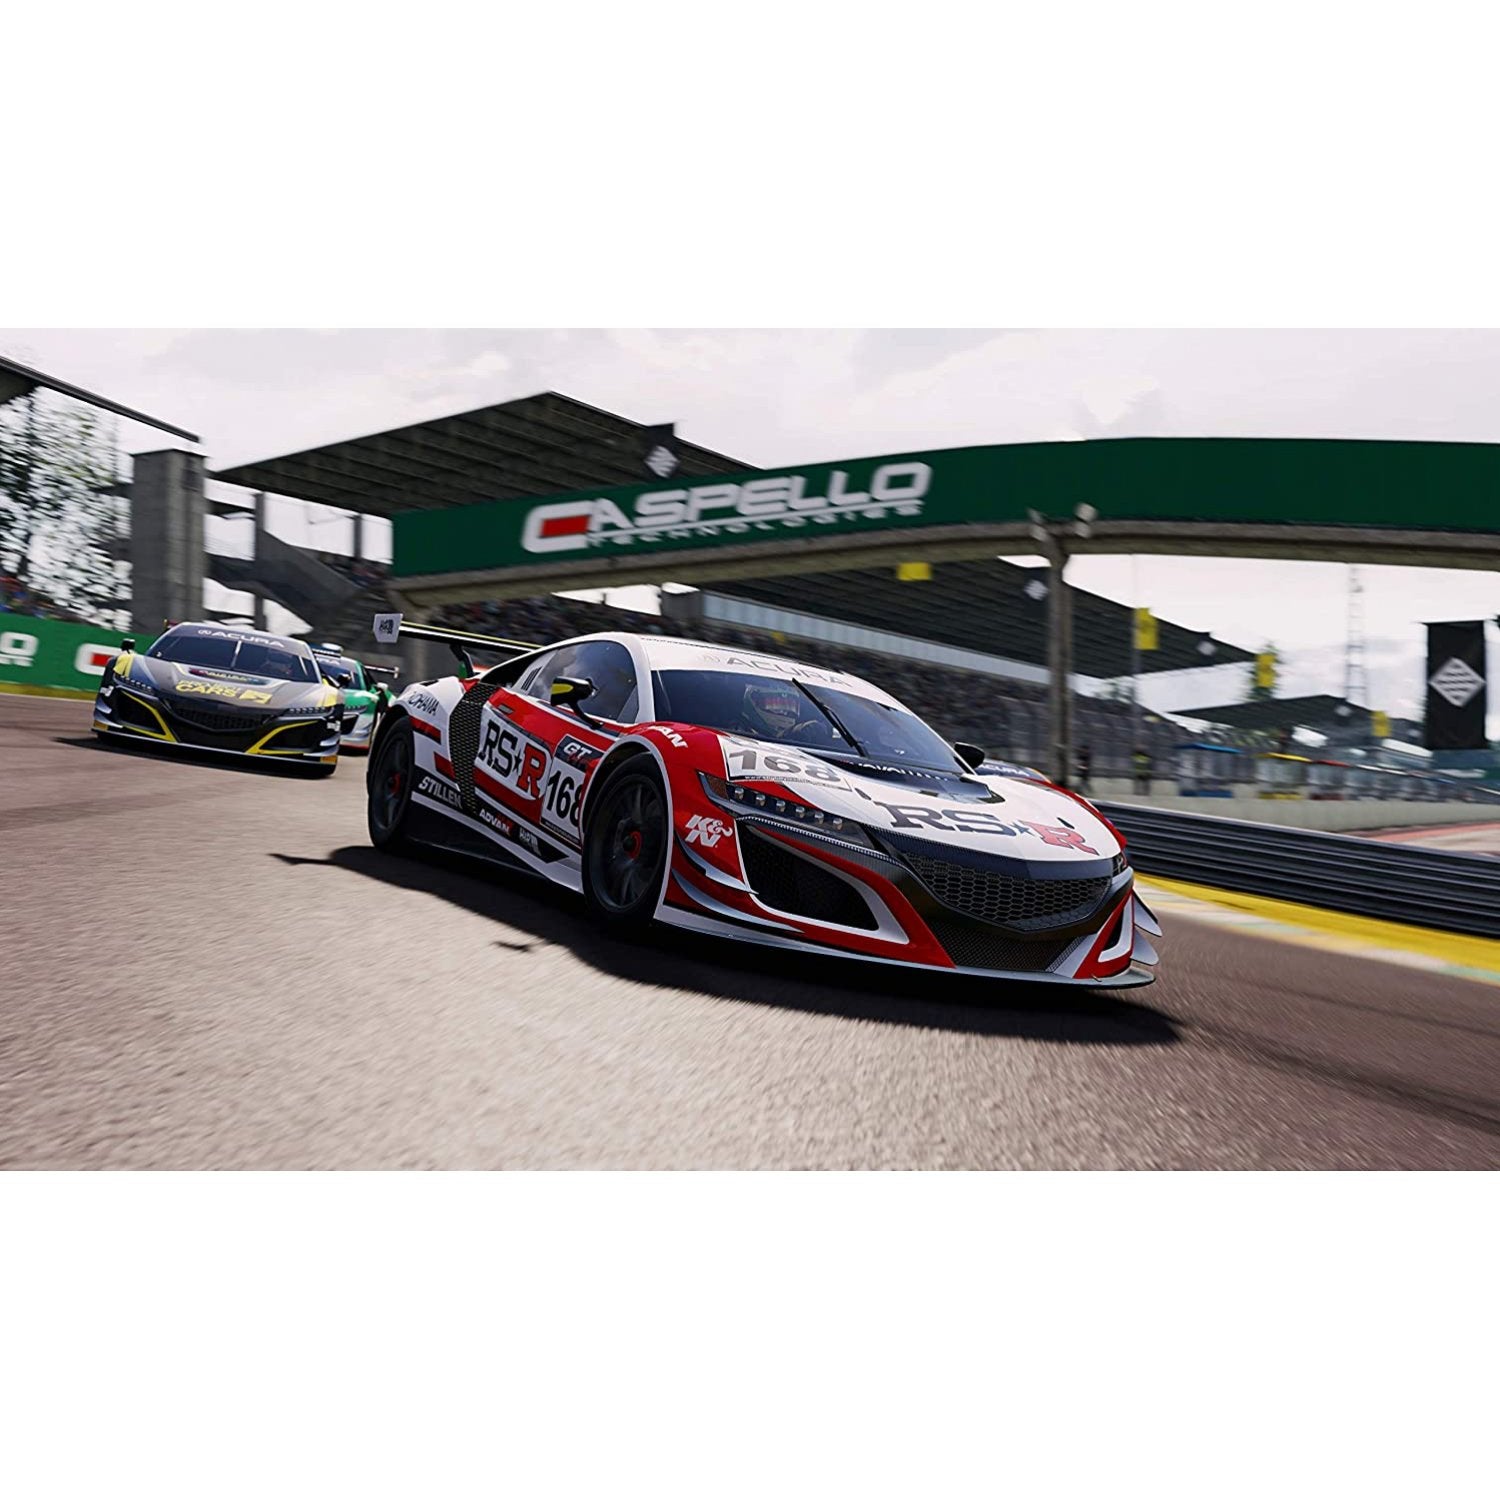 PS4 Project Cars 3